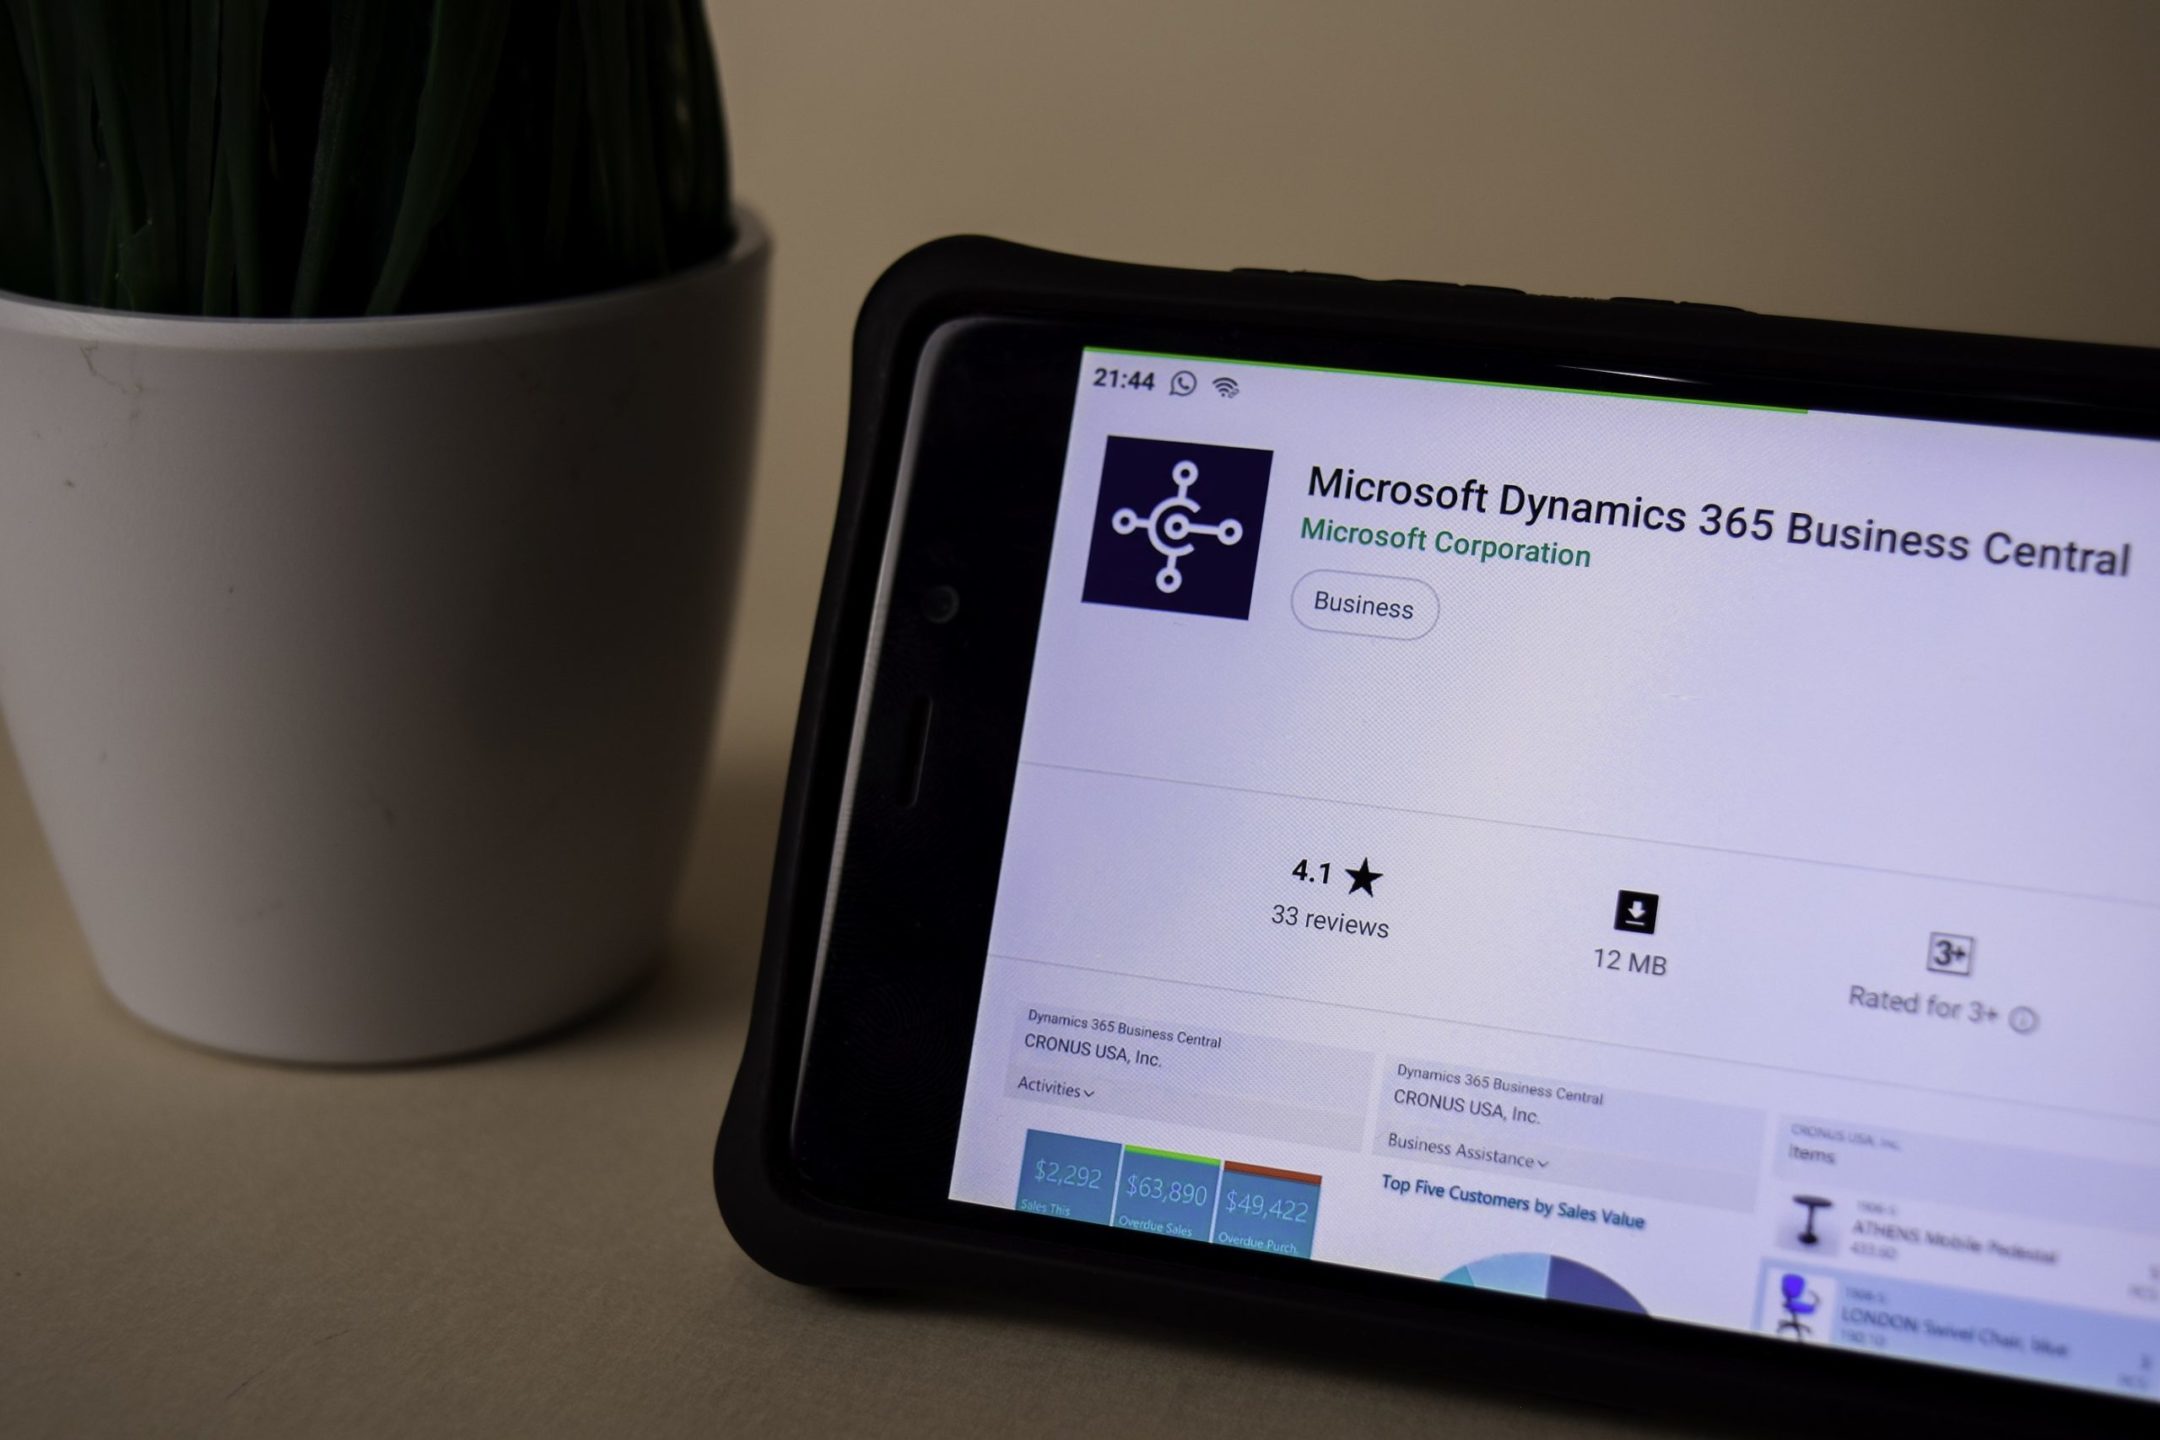 Why Upgrade from Dynamics NAV to Dynamics 365 Business Central